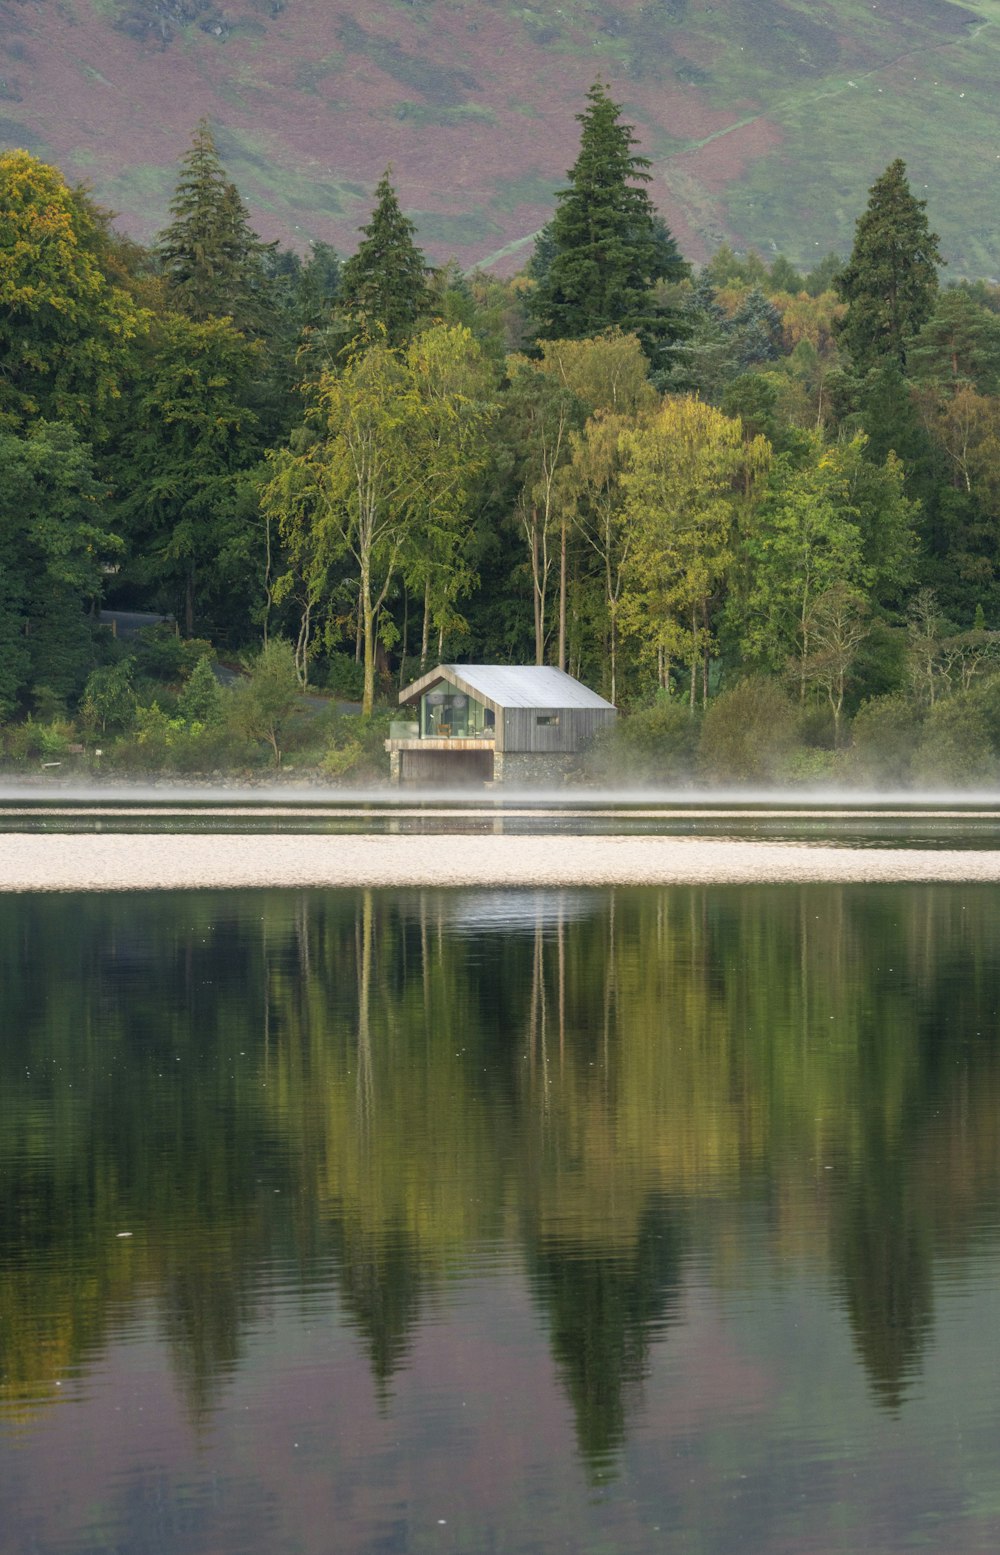 a small house on a lake surrounded by trees